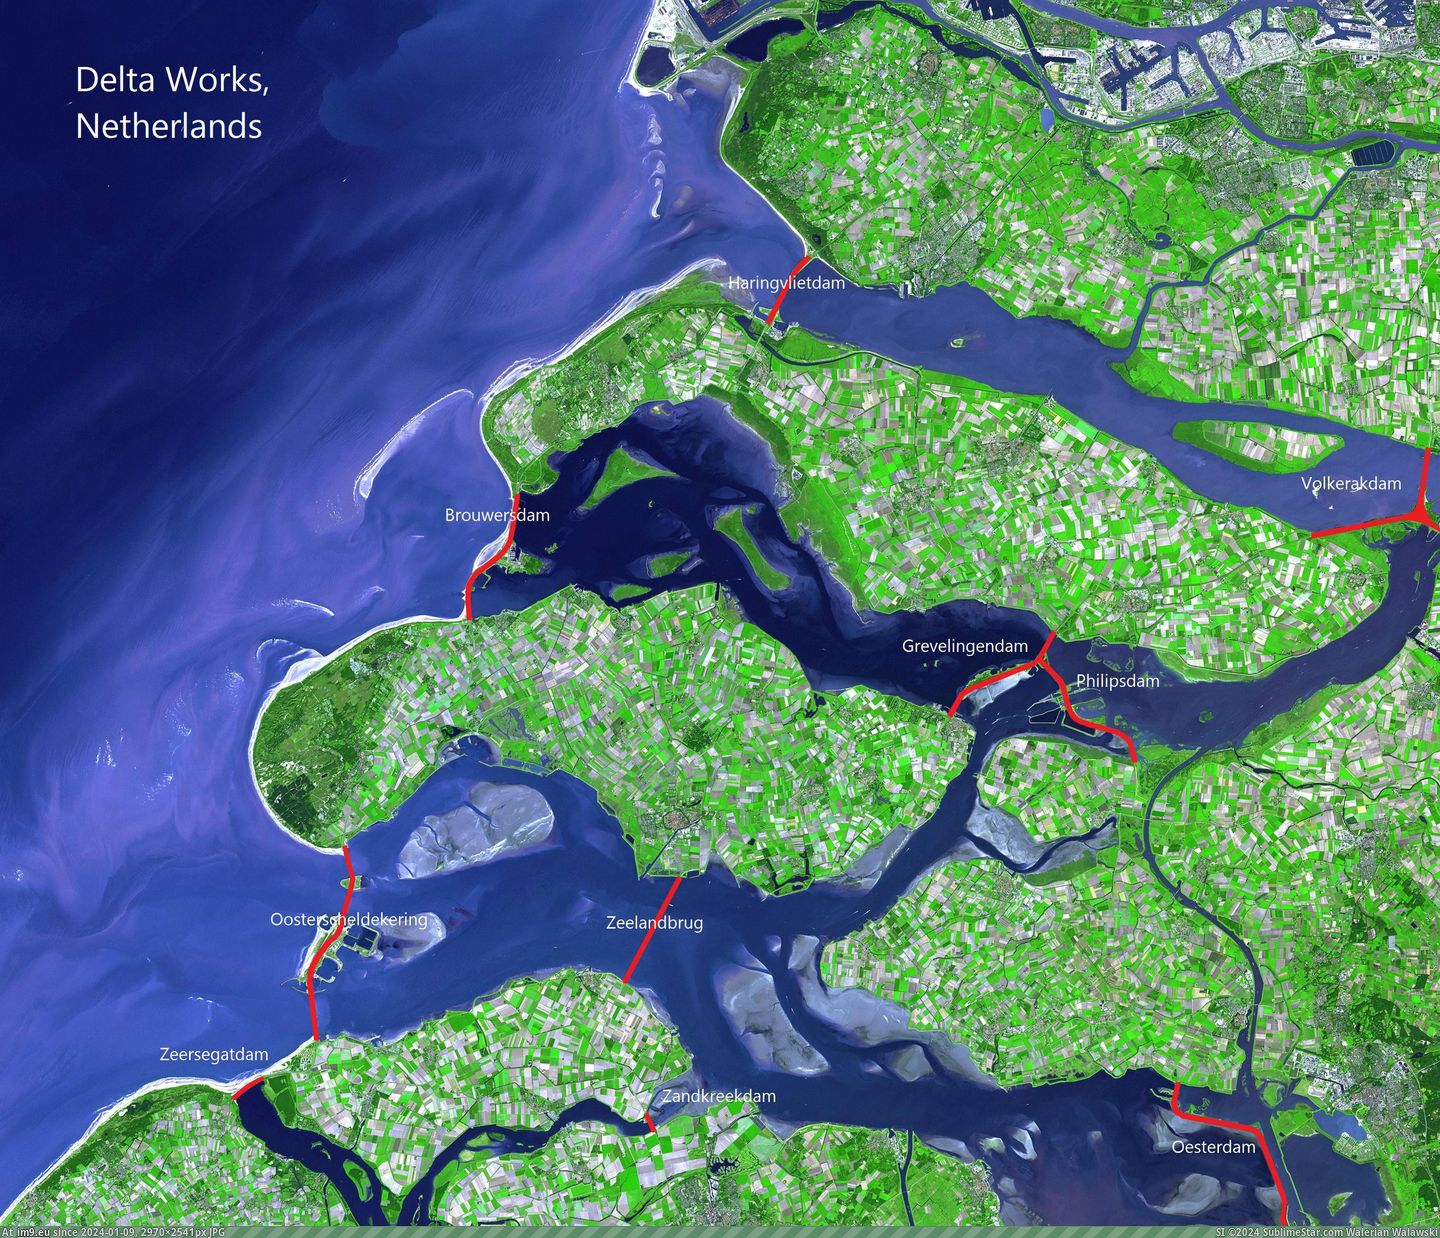 [Mapporn] Map of the Delta Works, Netherlands [2970x2529] (in My r/MAPS favs)